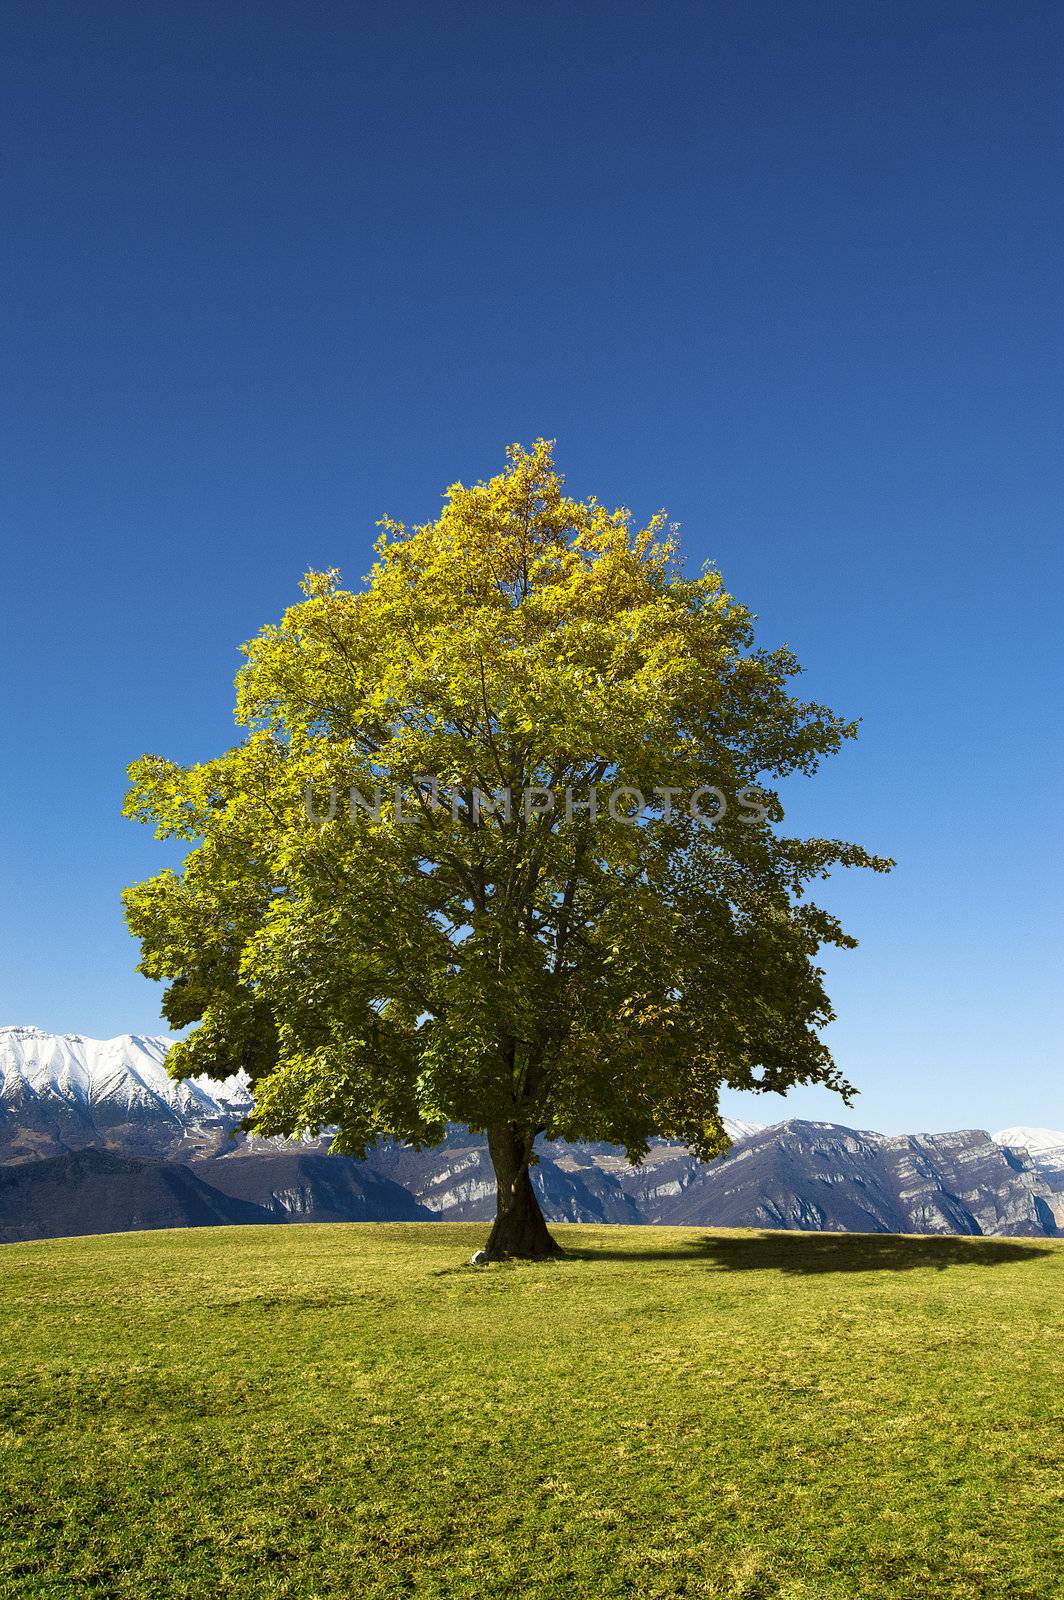 Solitary tree with leaves on a hill with blue sky and snow-capped mountains in the background